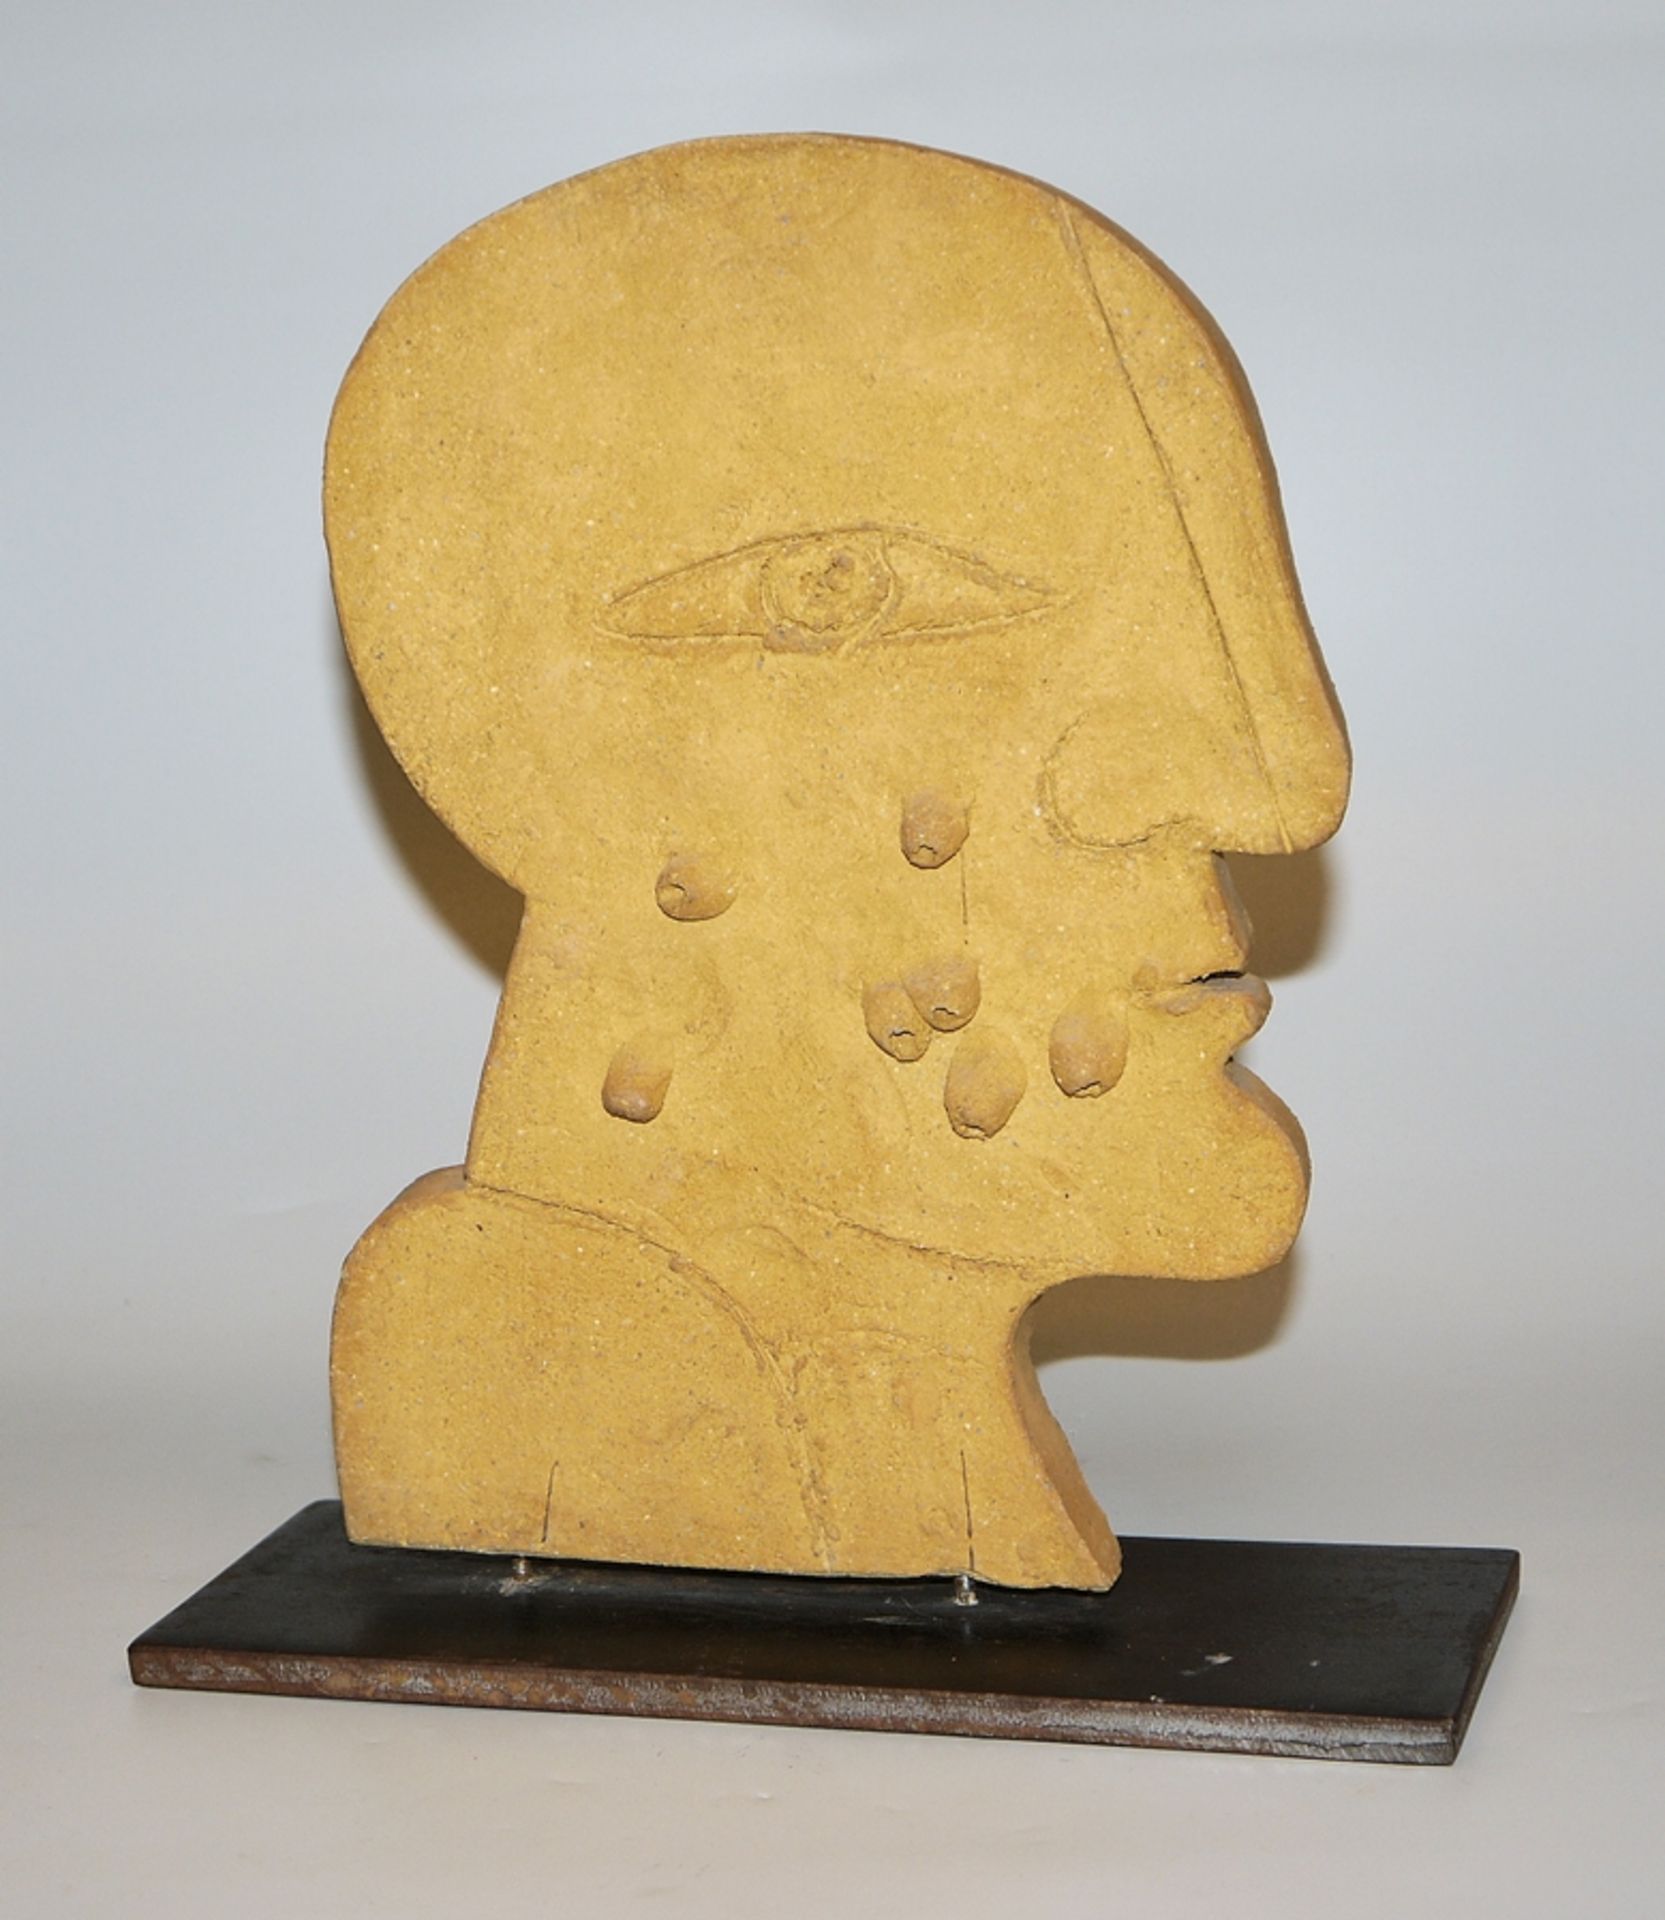 Horst Antes, "Small head with pustules", ochre-coloured body, unique piece from 1971